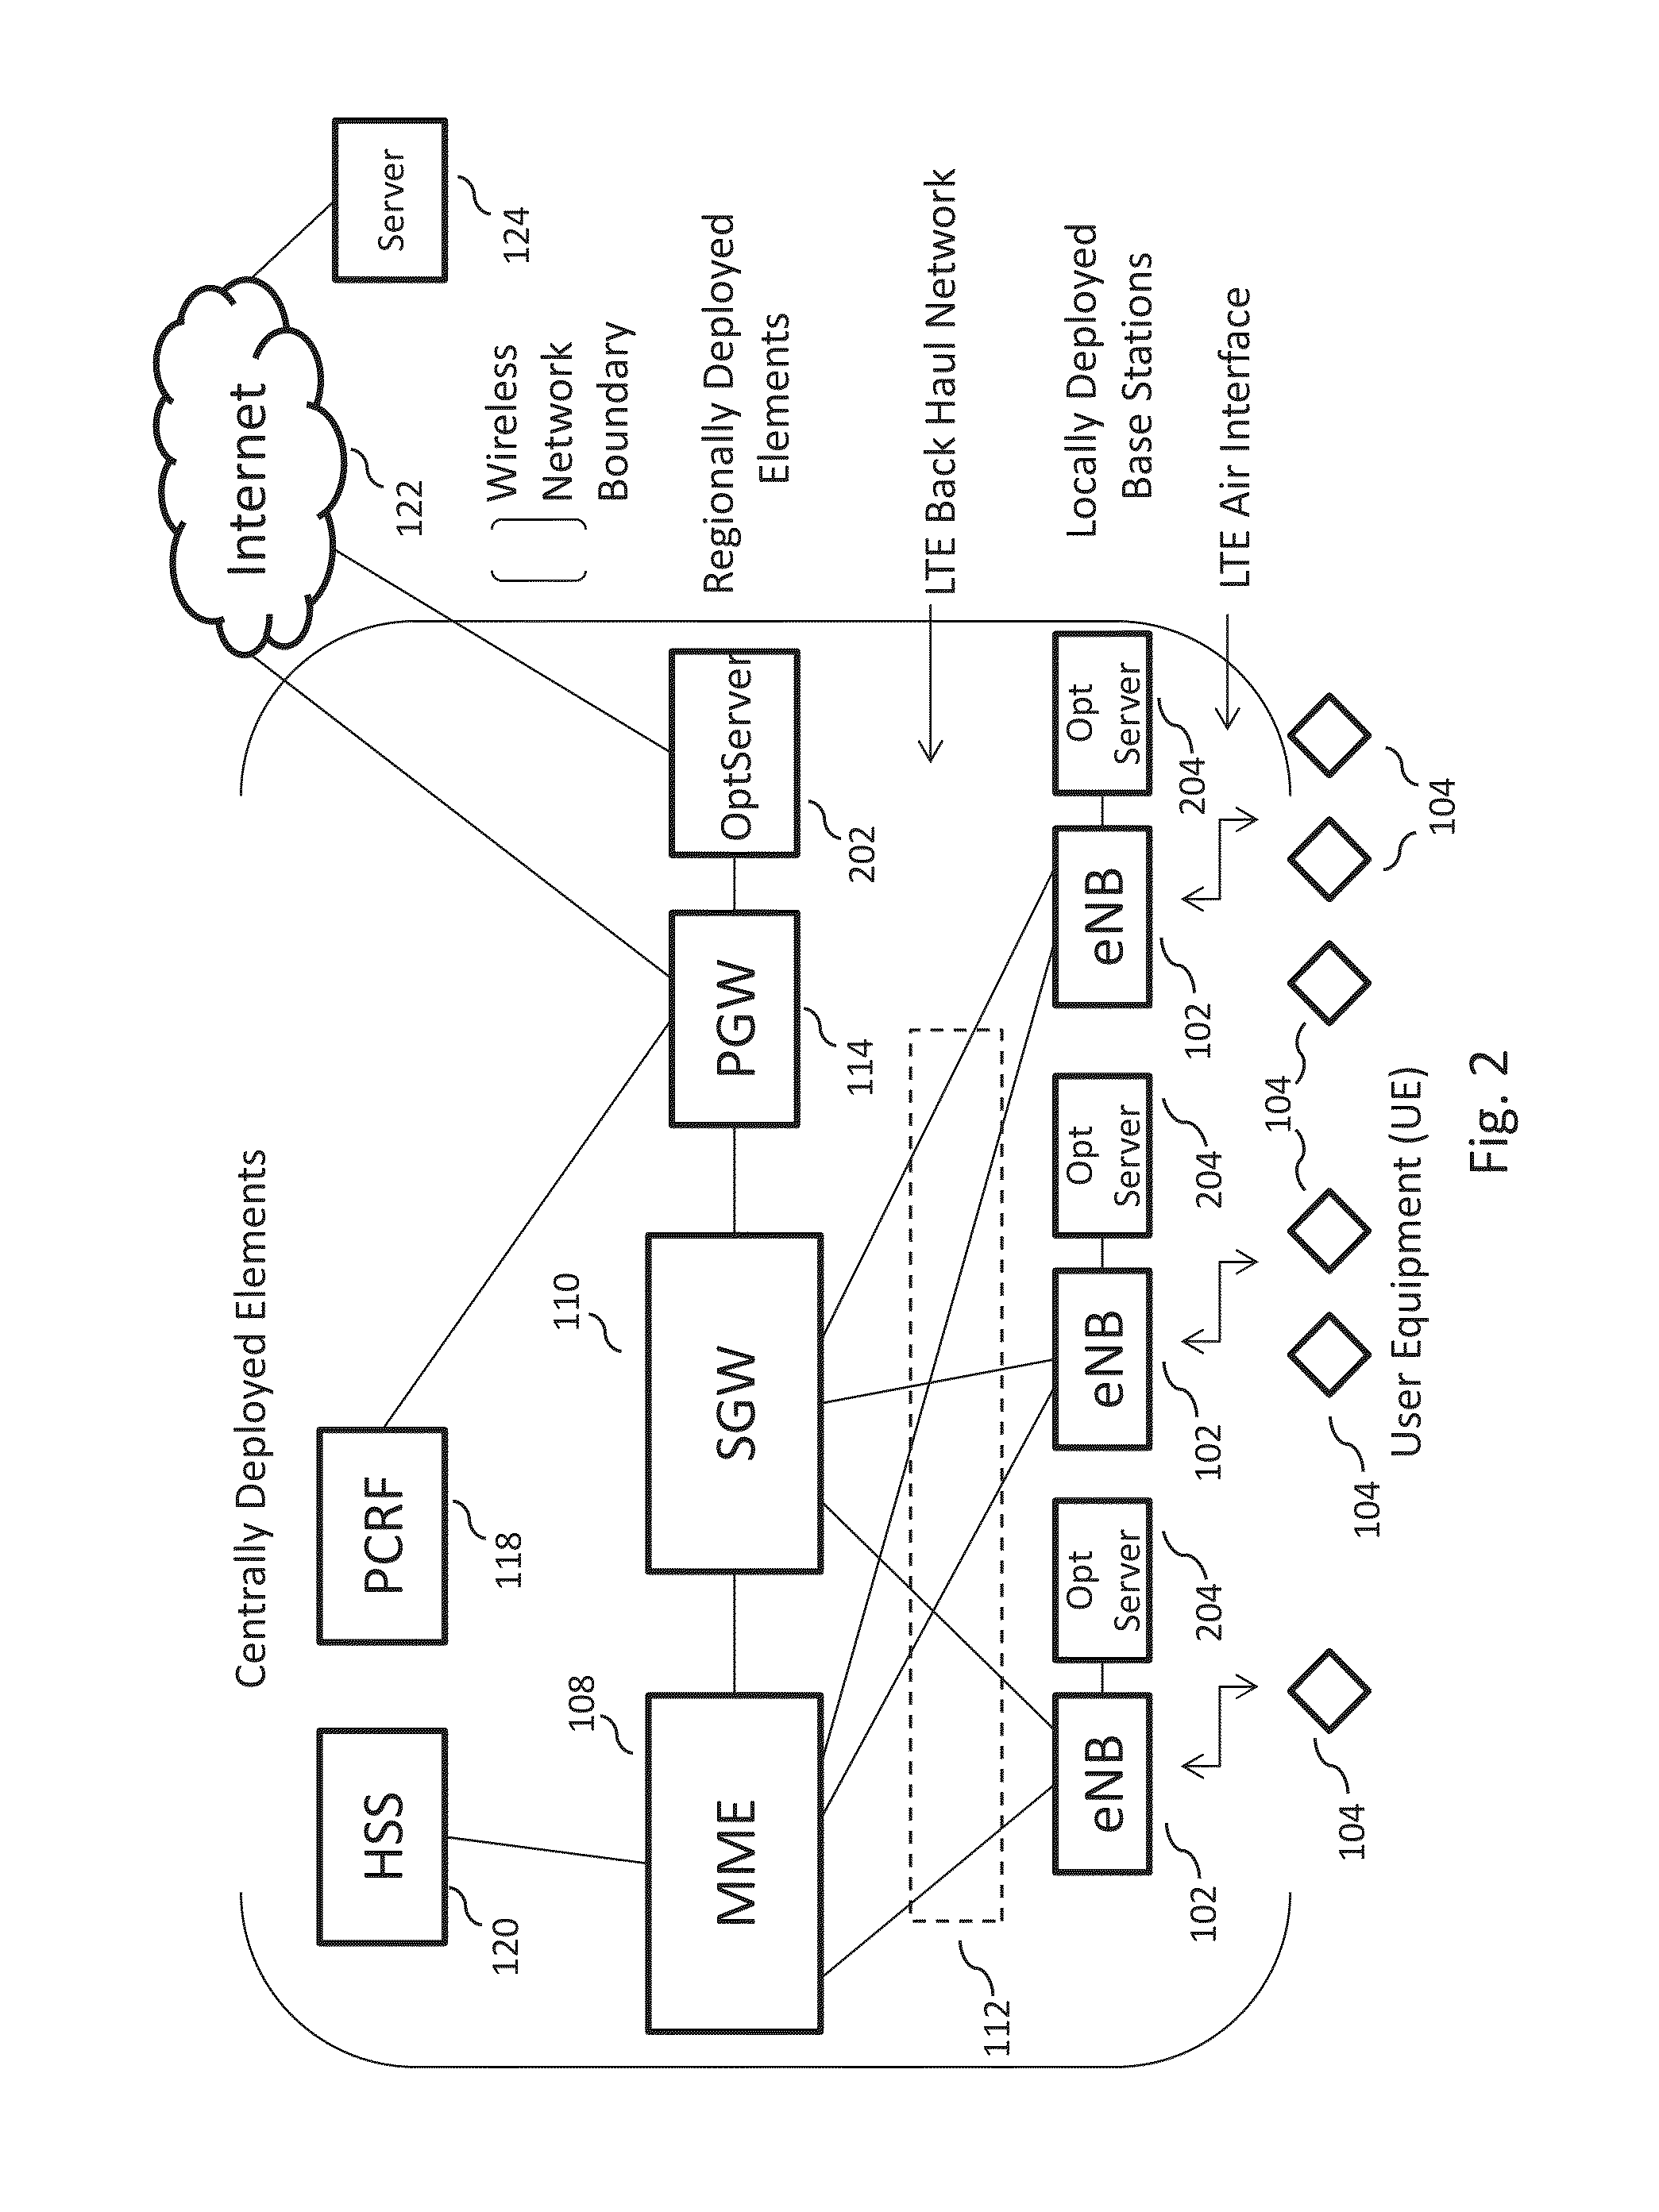 Efficient delivery of real-time asynchronous services over a wireless network